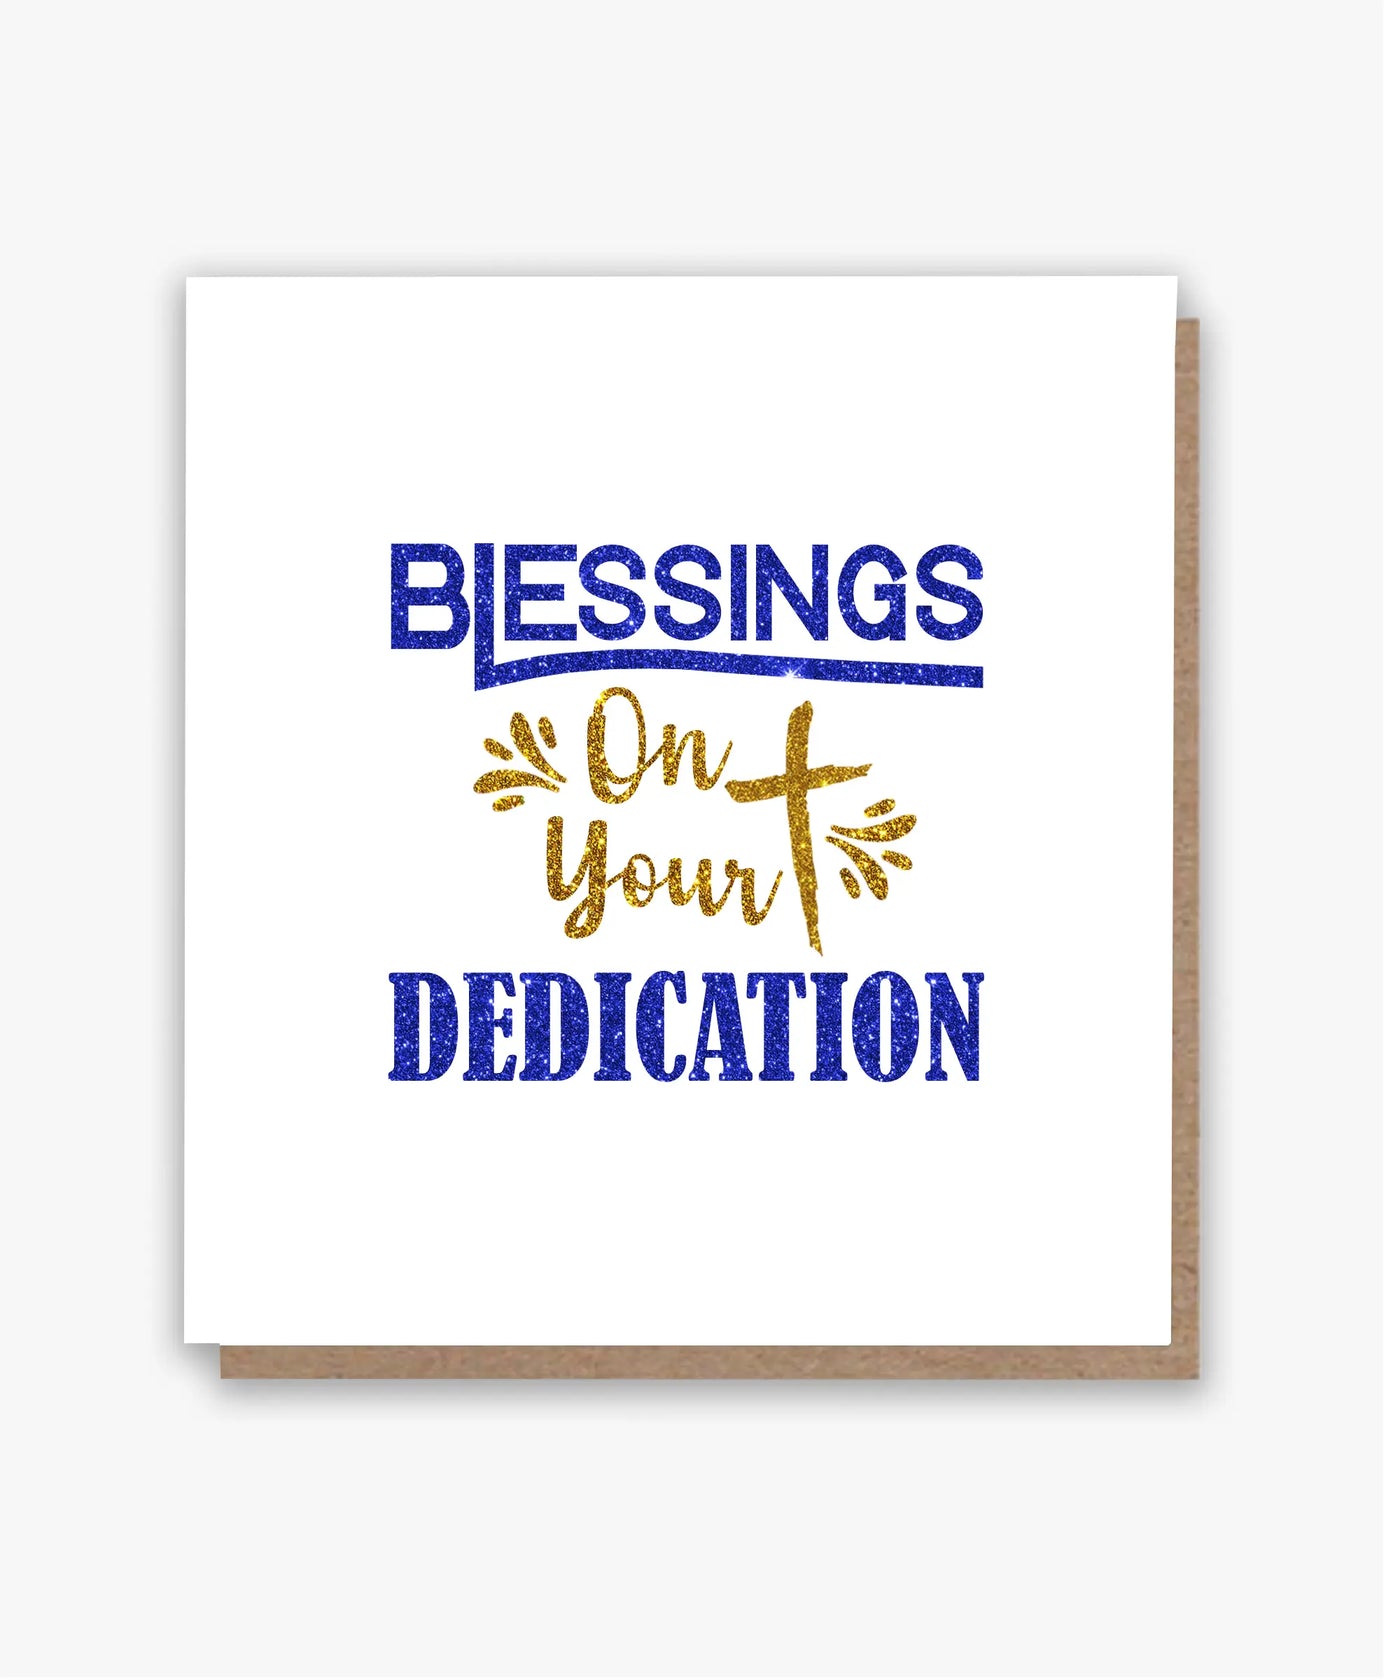 Blessings On Your Dedication Card! 💙